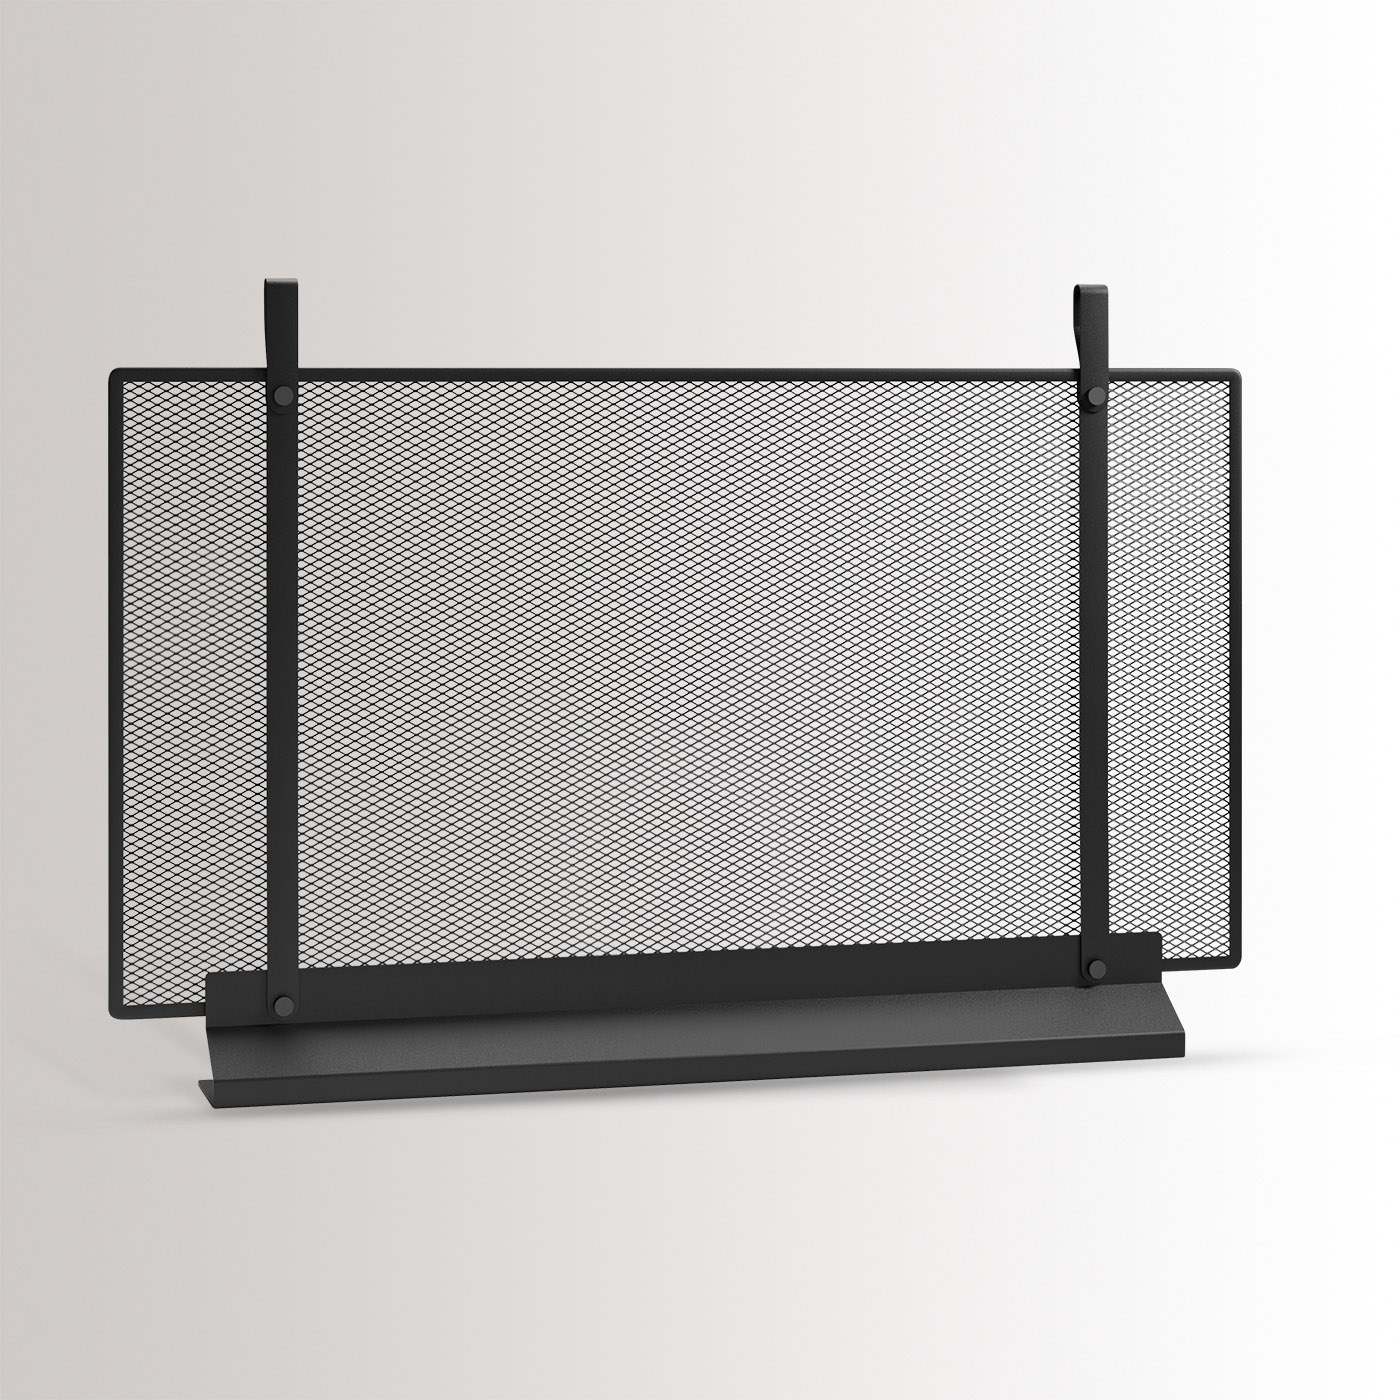 The large Emma fireplace screen in Noir combines charcoal black powder-coated steel, with details in anodised aluminium.